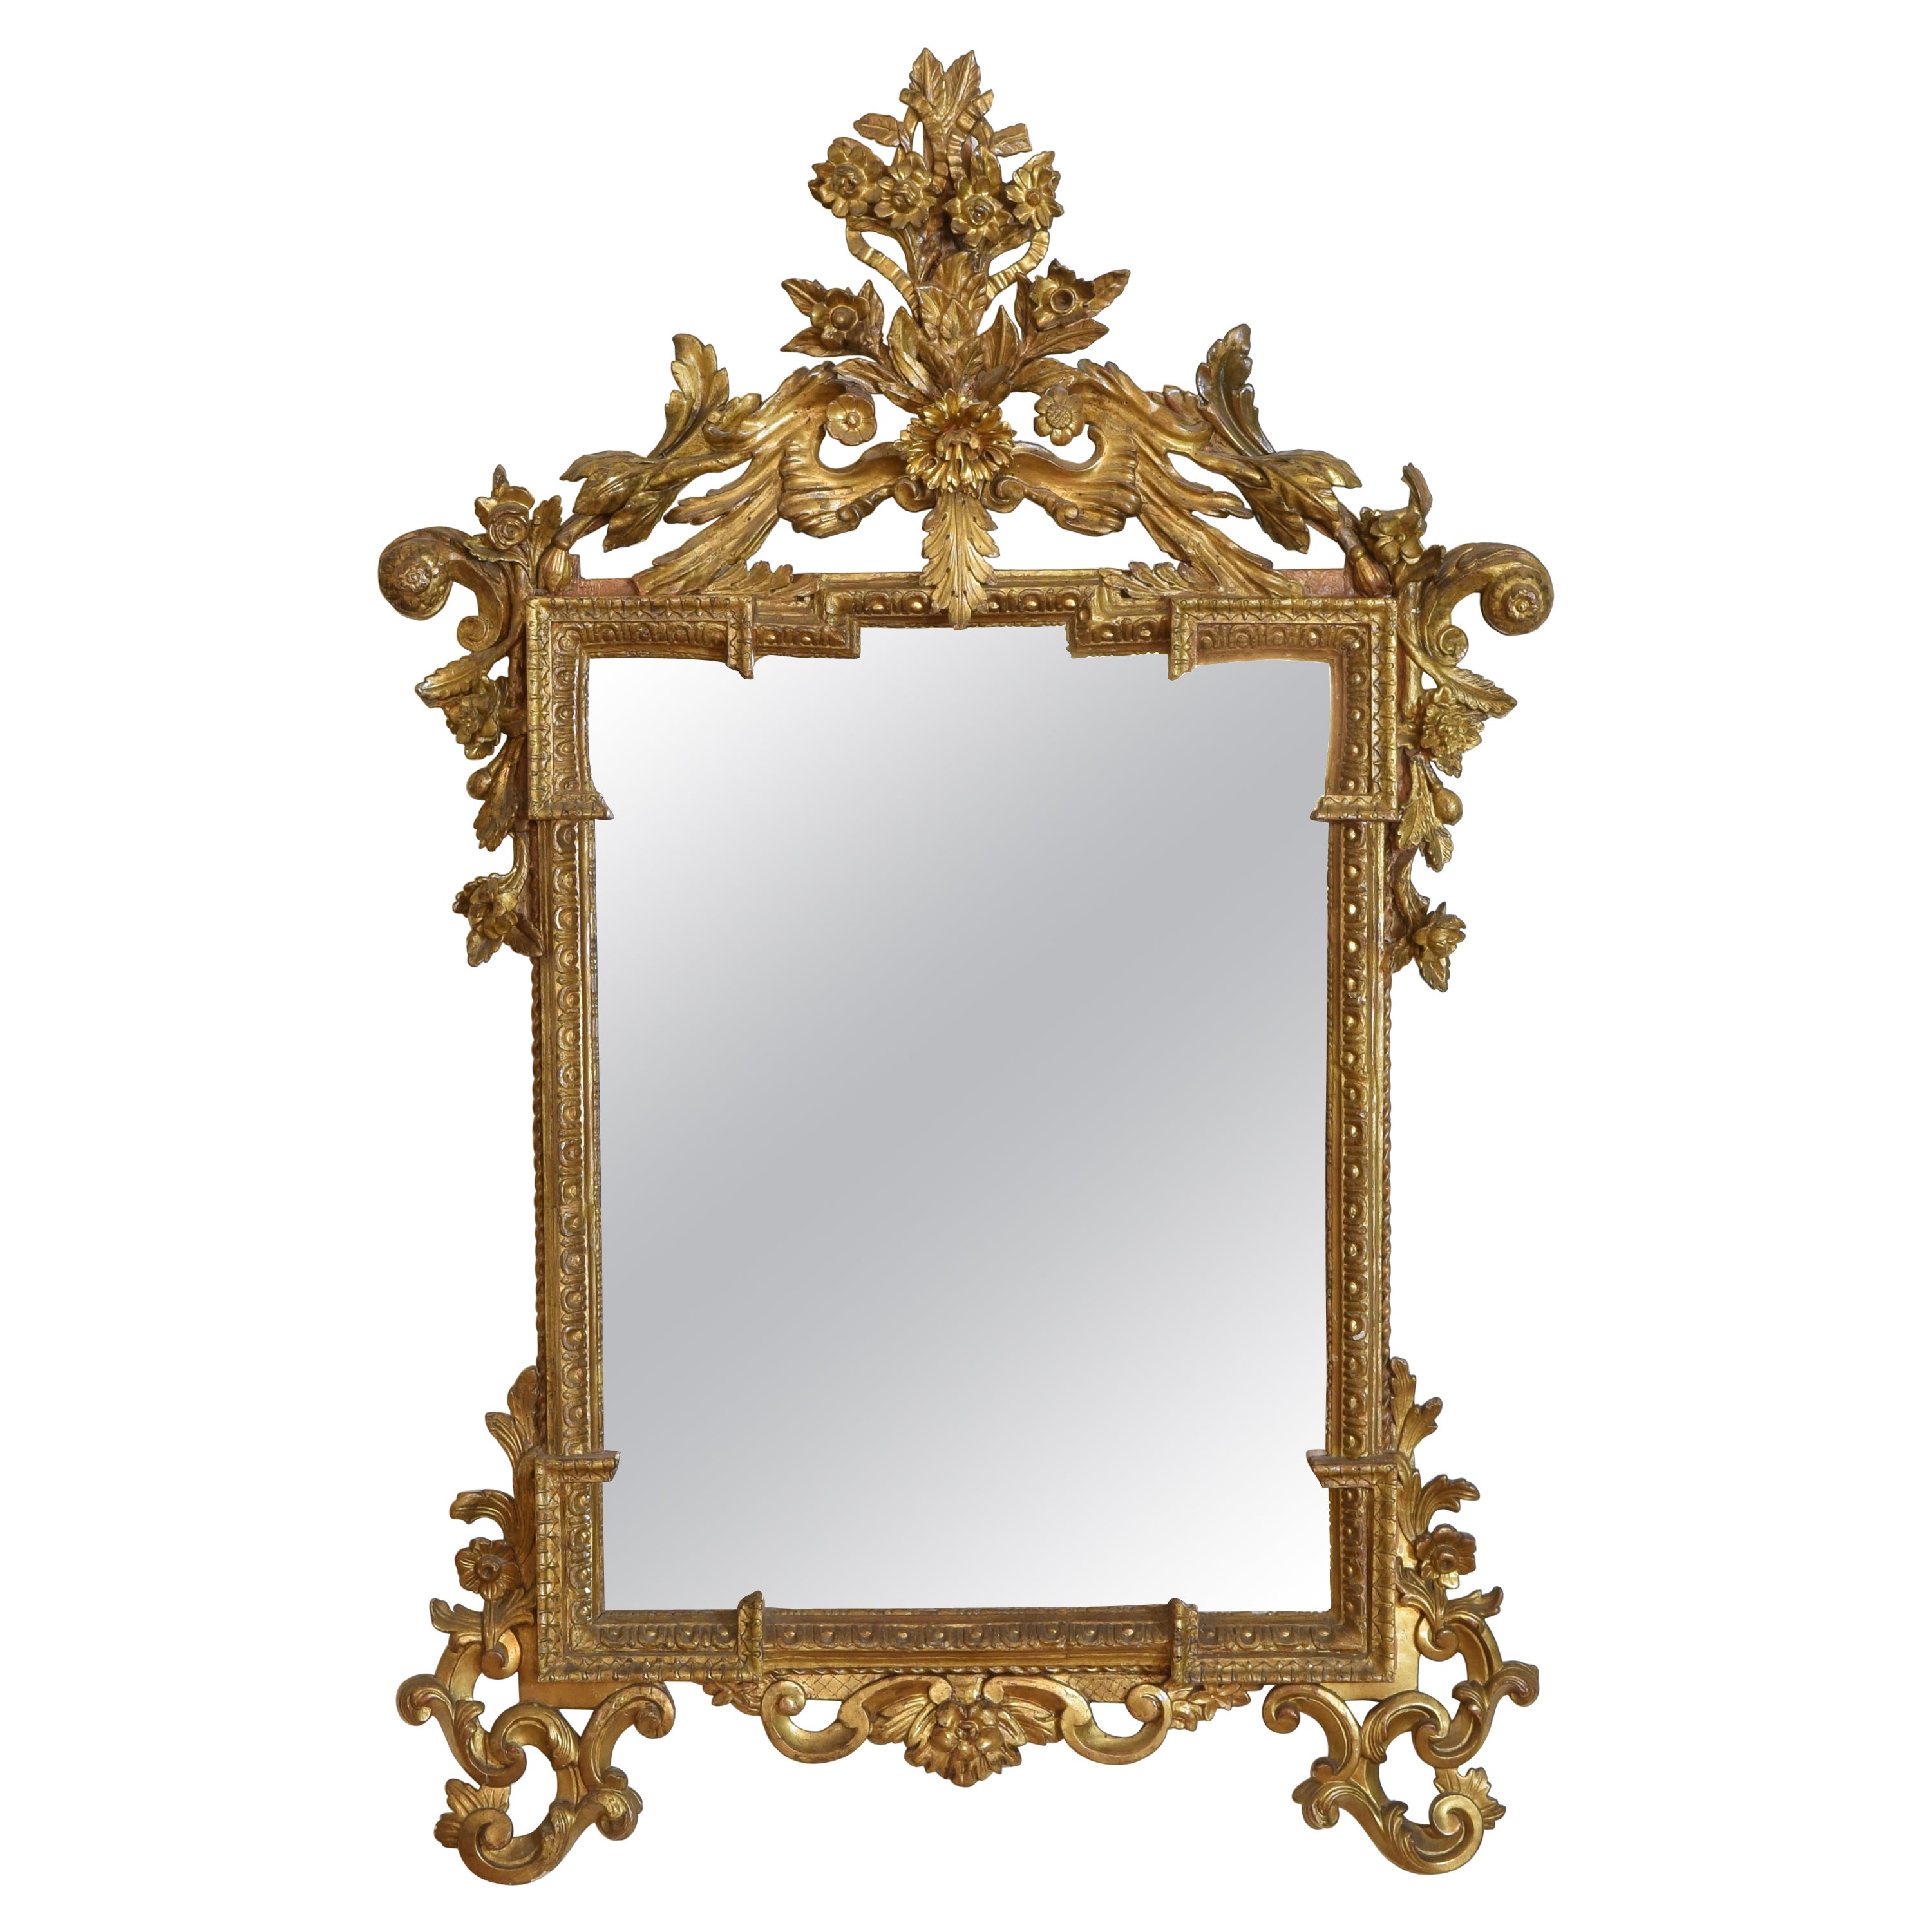 Italian Transitional Rococo/Neoclassical Carved Giltwood Mirror, Late 18th Cen.